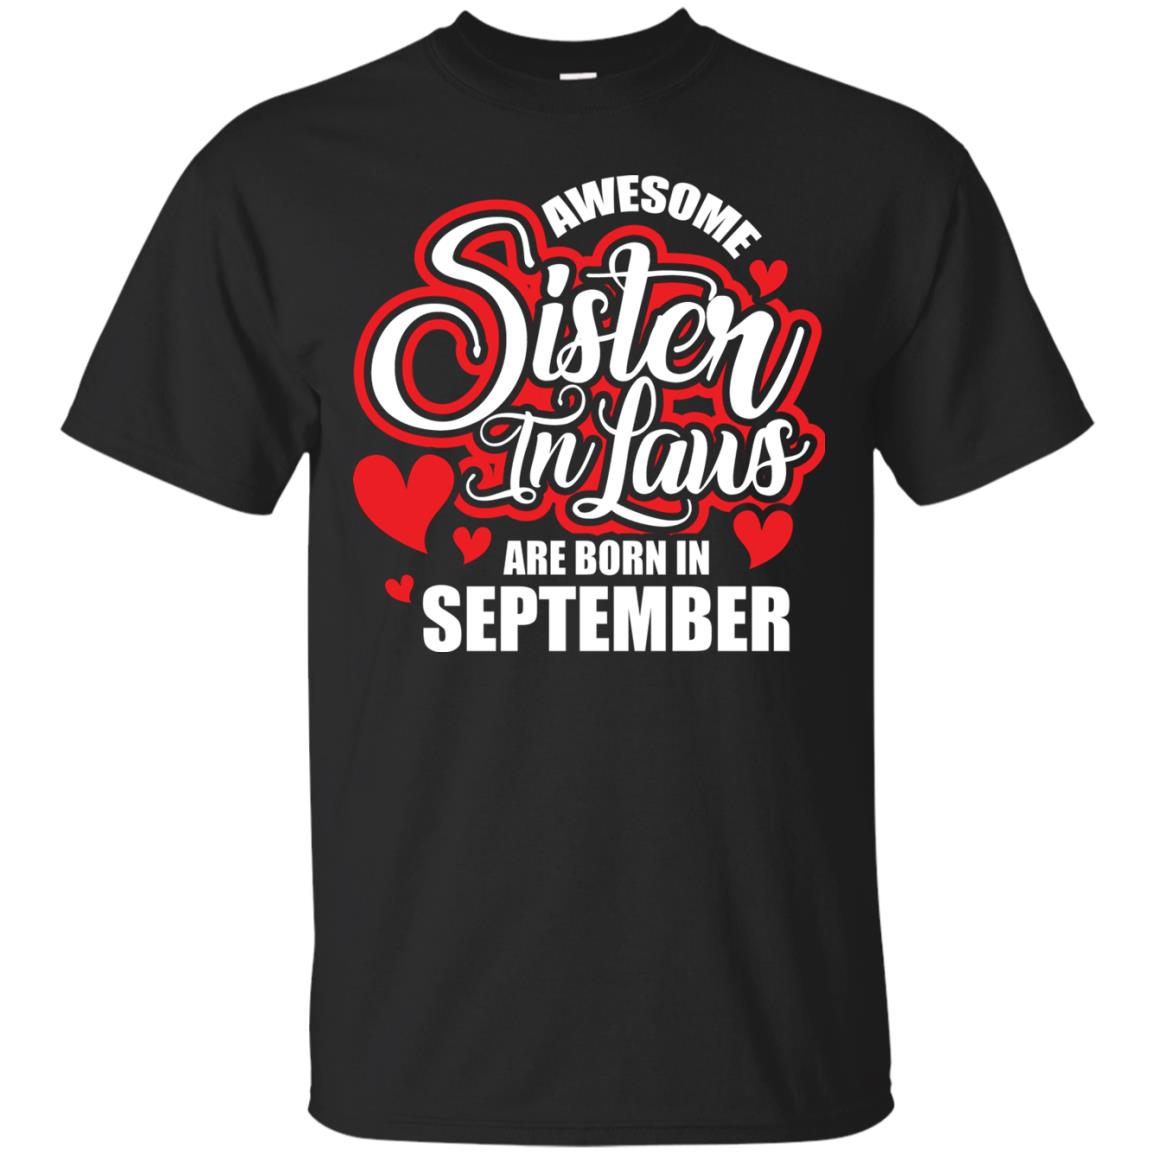 September T-shirt Awesome Sister In Laws Are Born In September